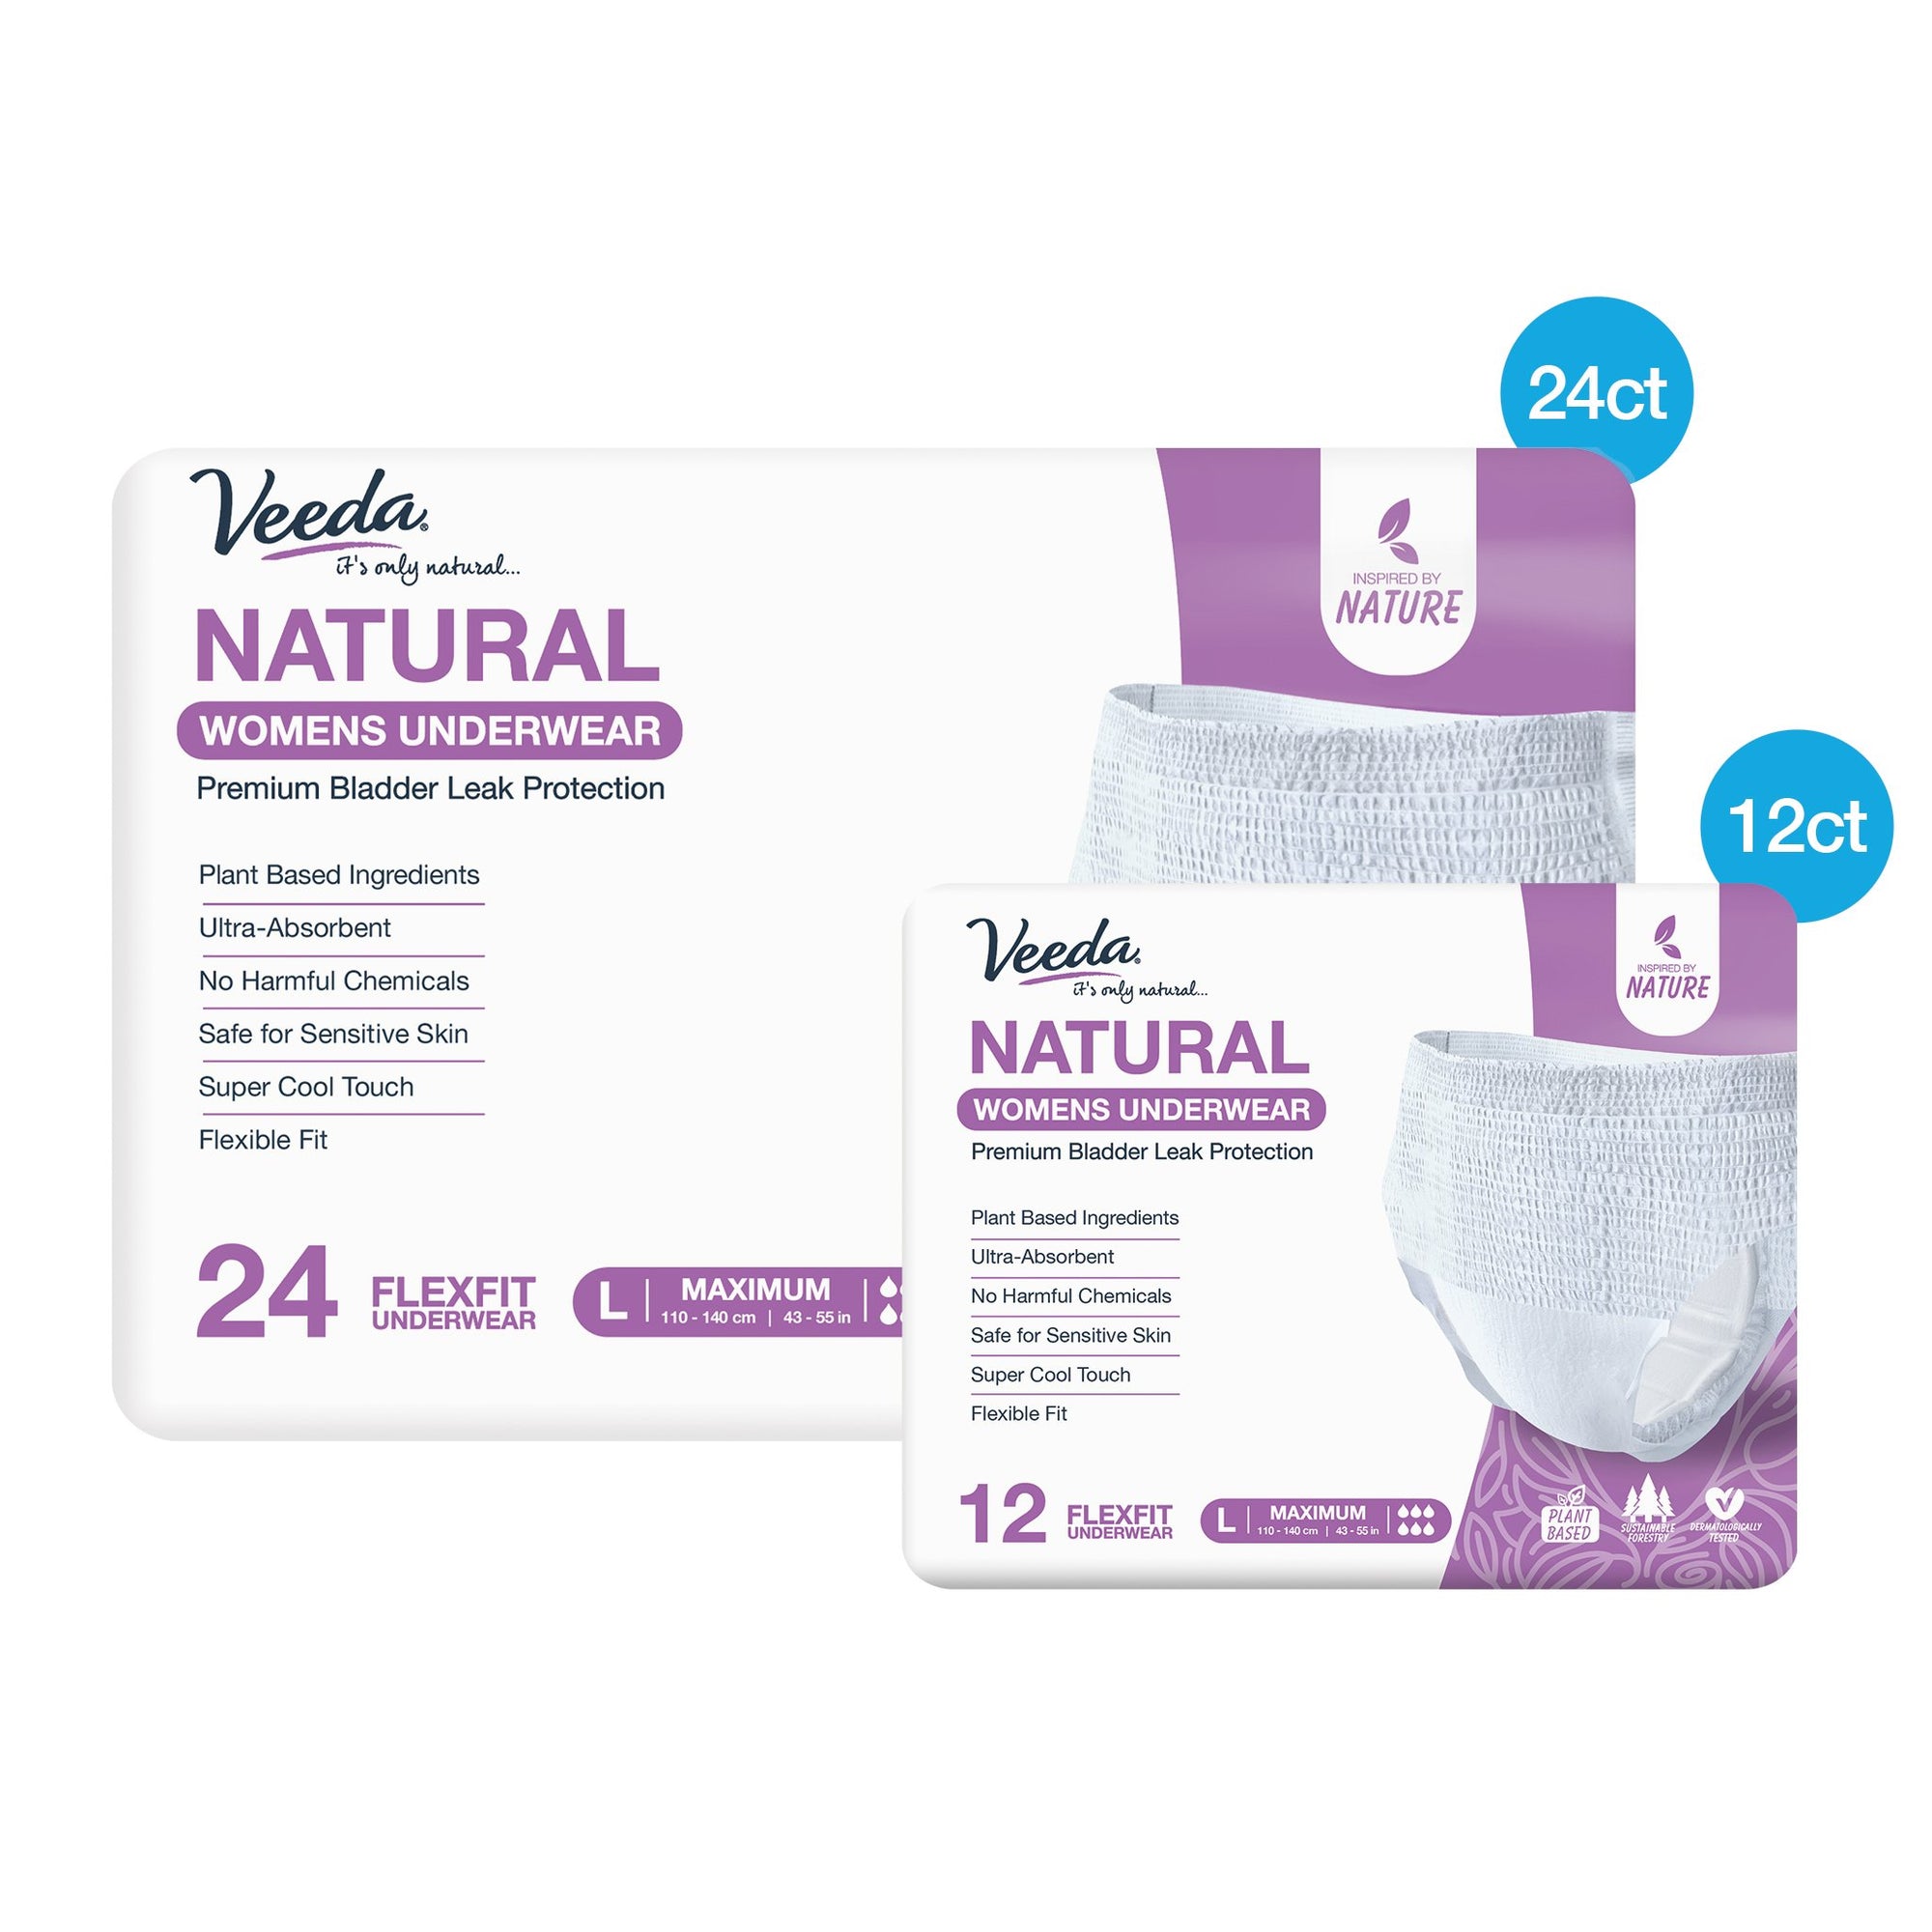 Veeda Natural Men's Incontinence Underwear. S, M, L, XL Available